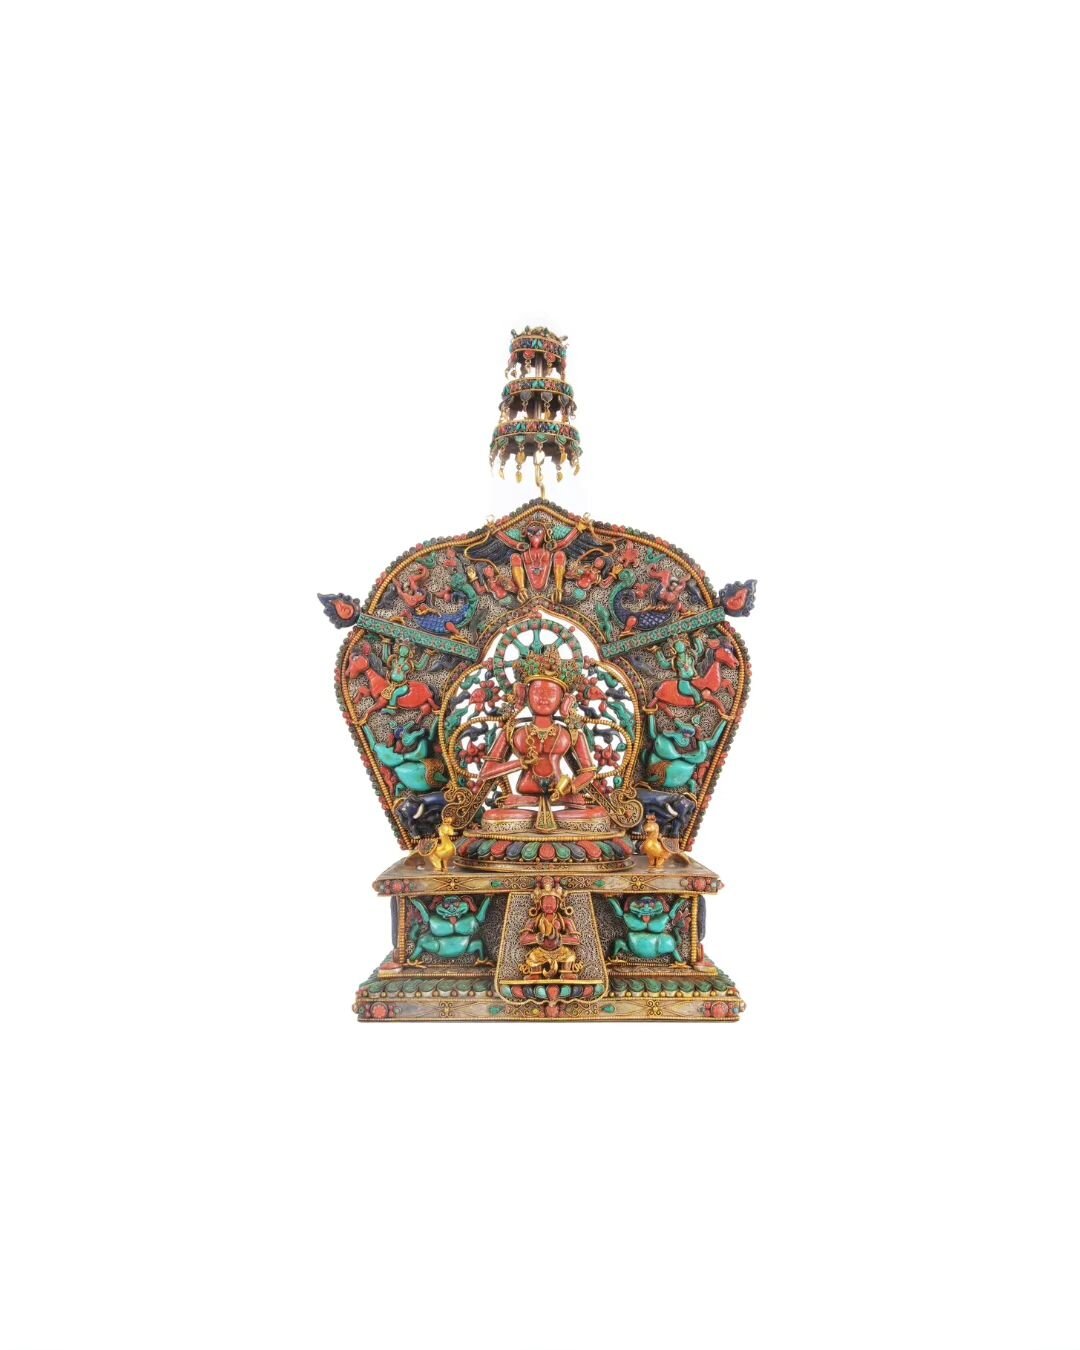 Exquisitely crafted with meticulous attention to detail using traditional Nepalese techniques, this elaborate sculpture, as seen here, embodies the divine presence of one of the forms of the revered Goddess Tara. Symbolizing compassion and empathy, s